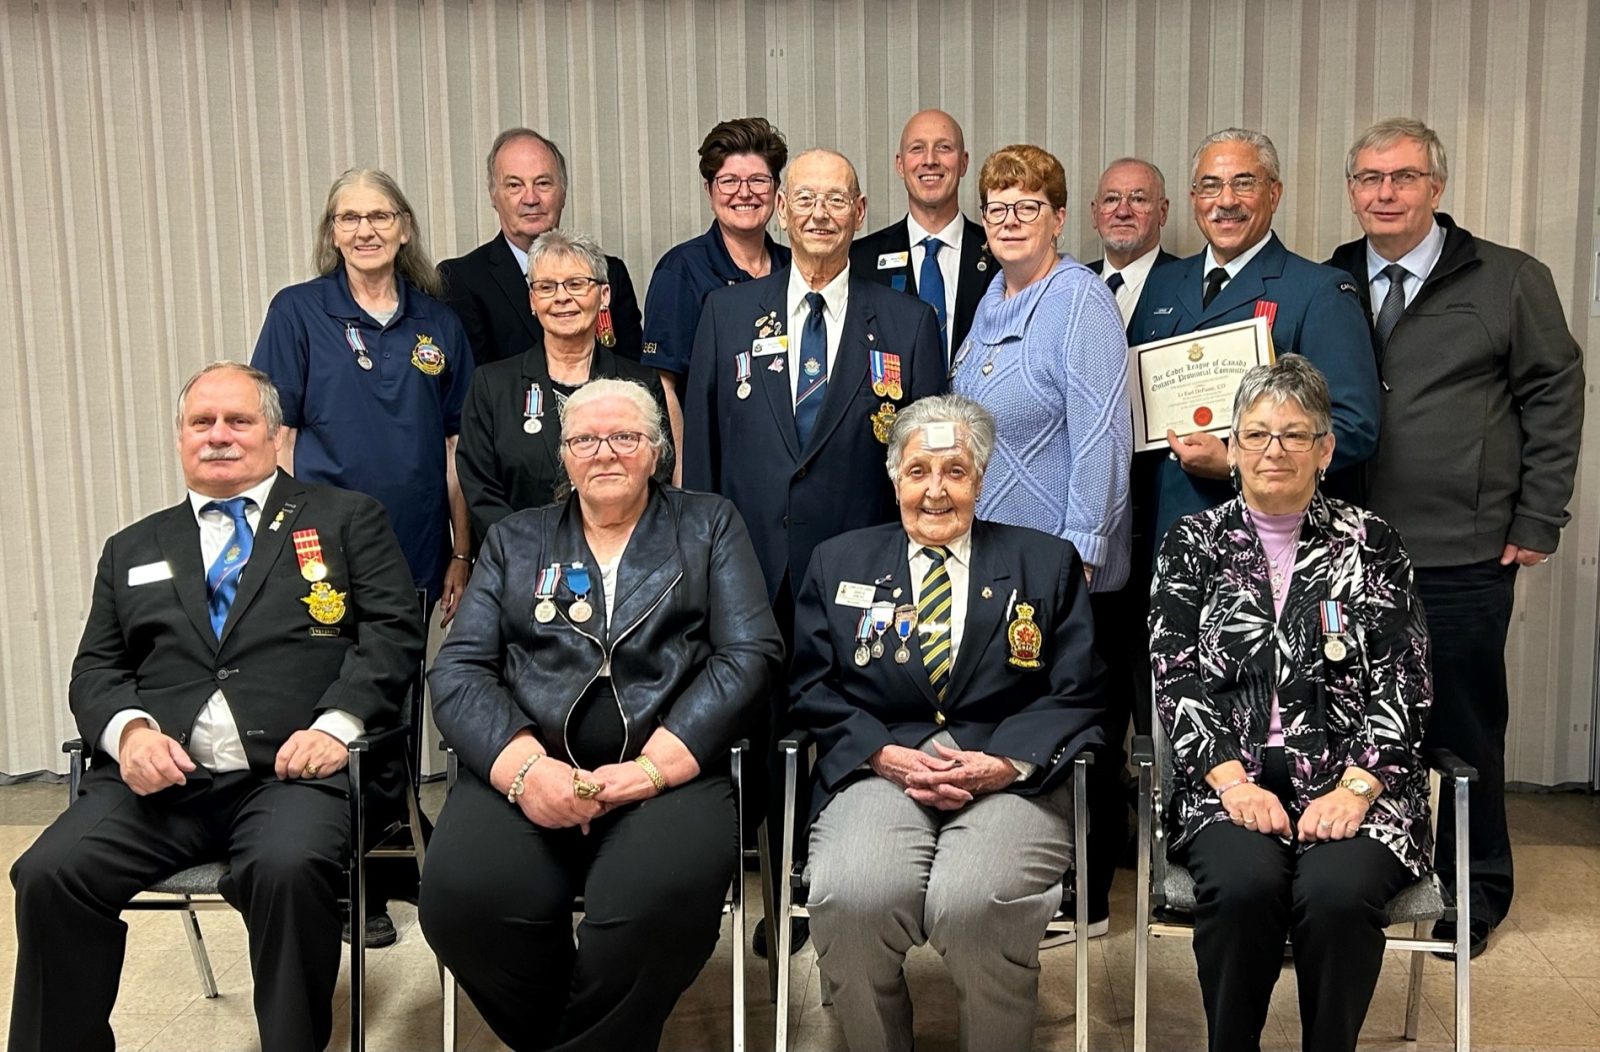 The Air Cadet League of Canada Honours Local Volunteers